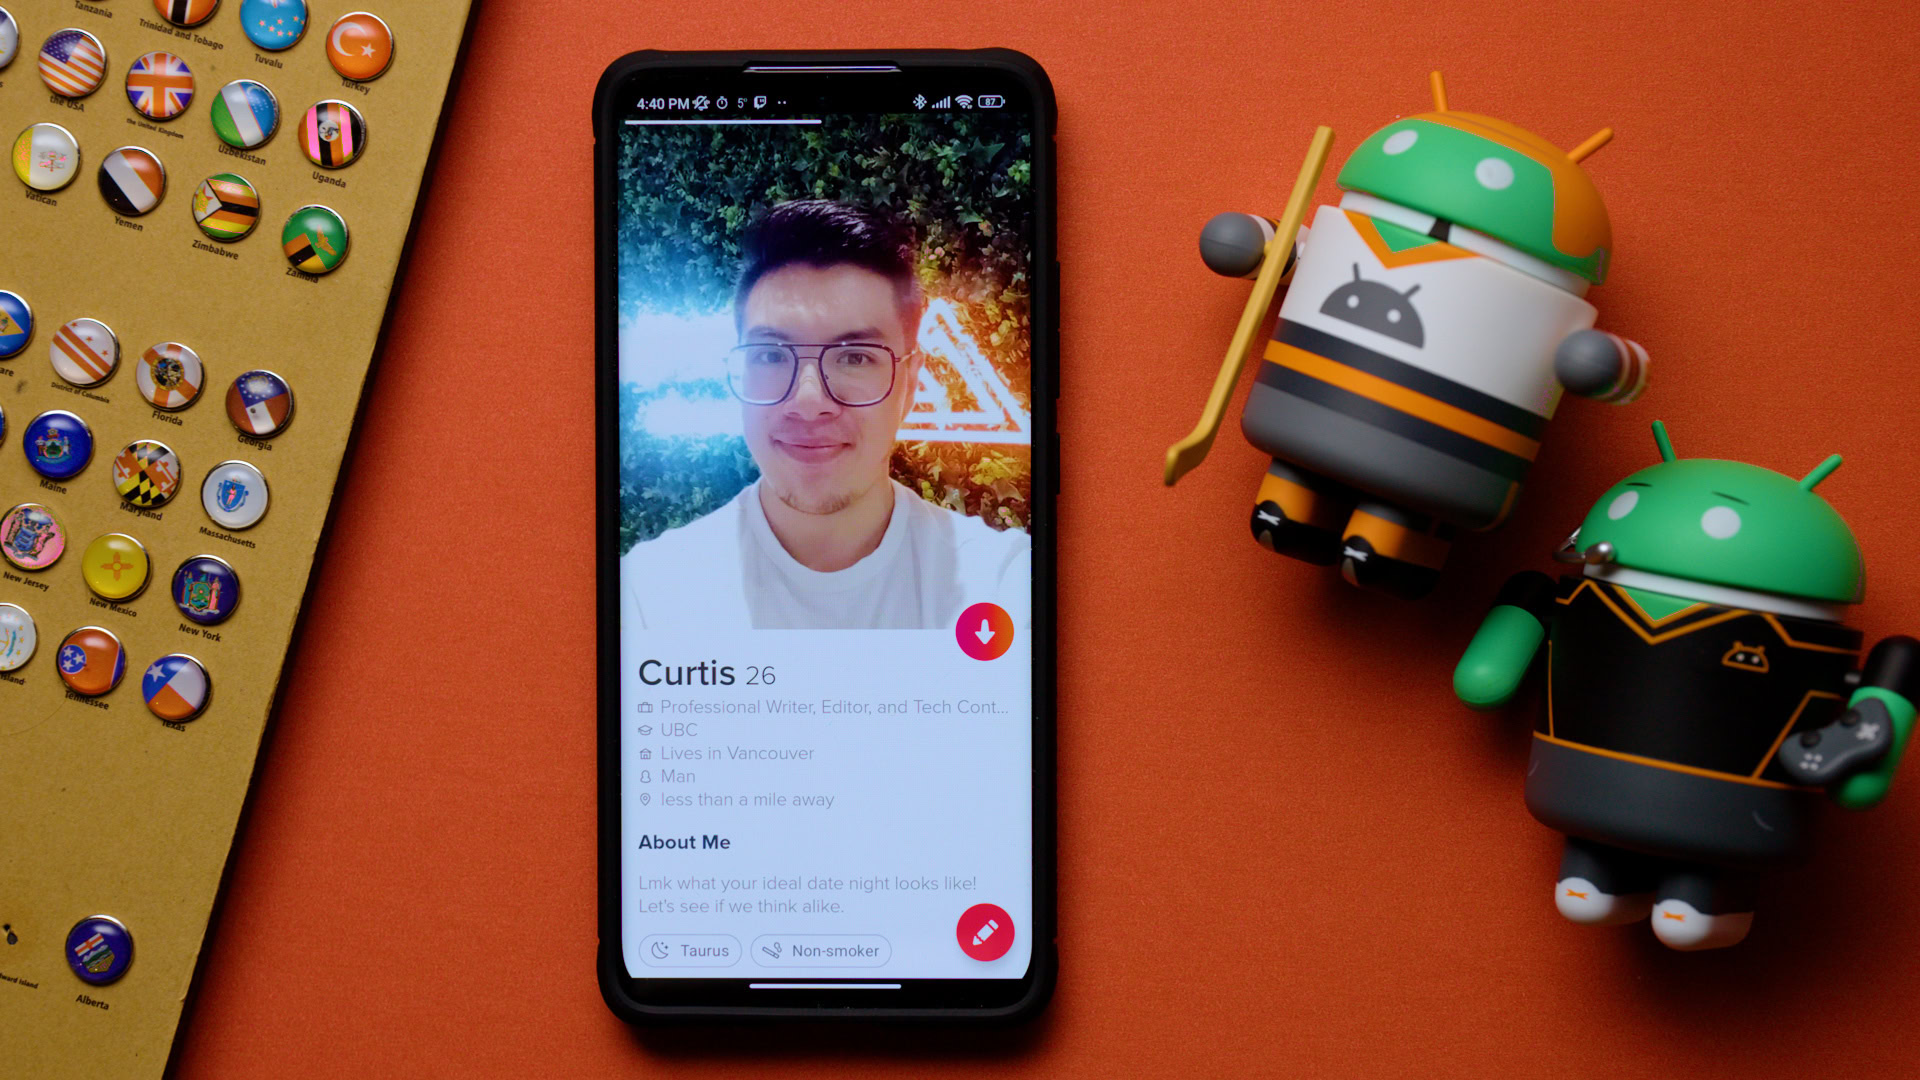 Google puts Tinder ban on hold pending yet another Play Billing